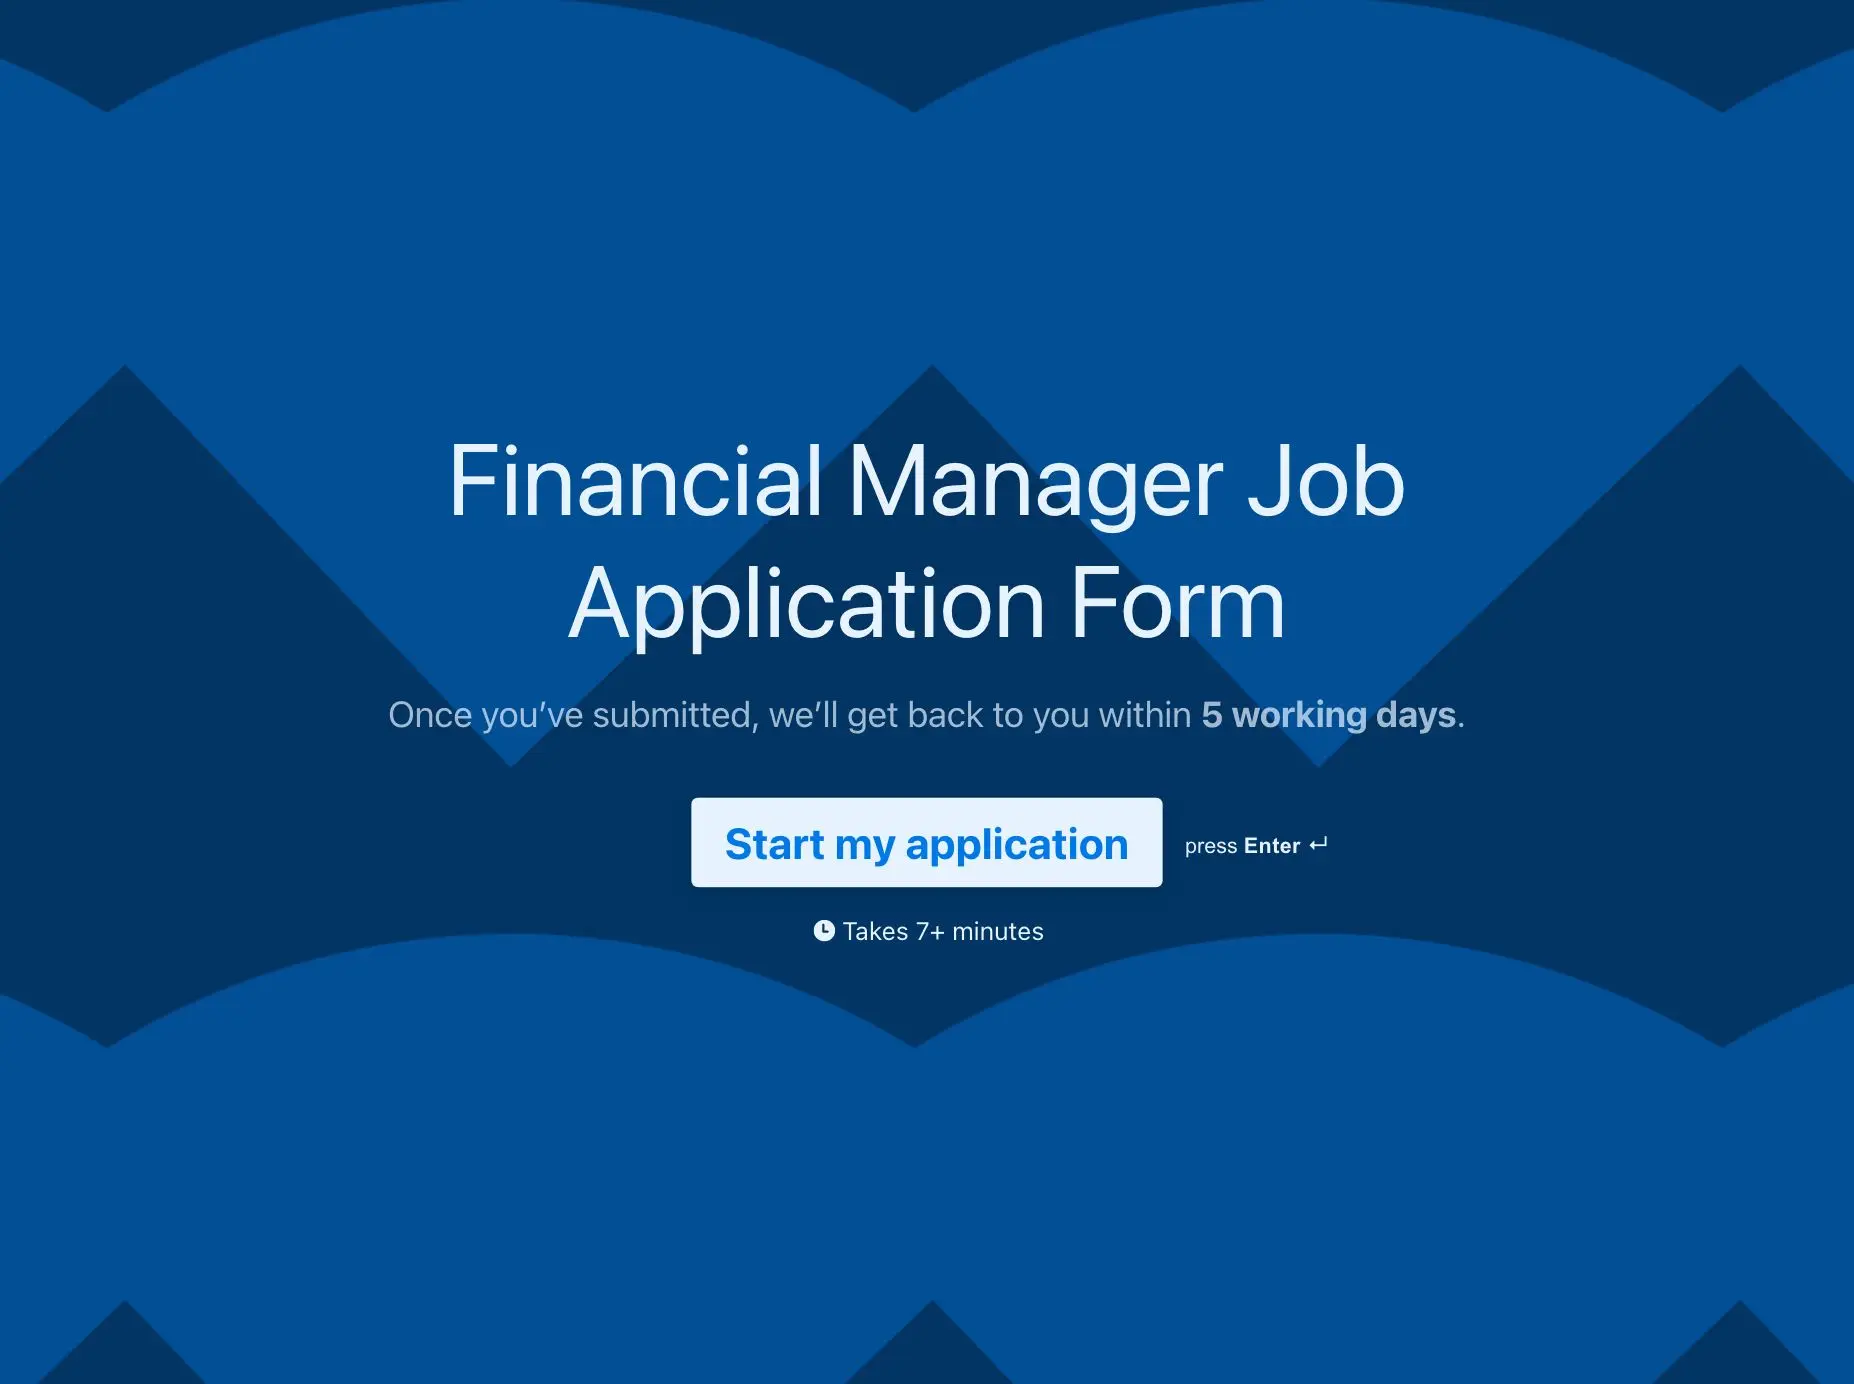 Financial Manager Job Application Form Template Hero